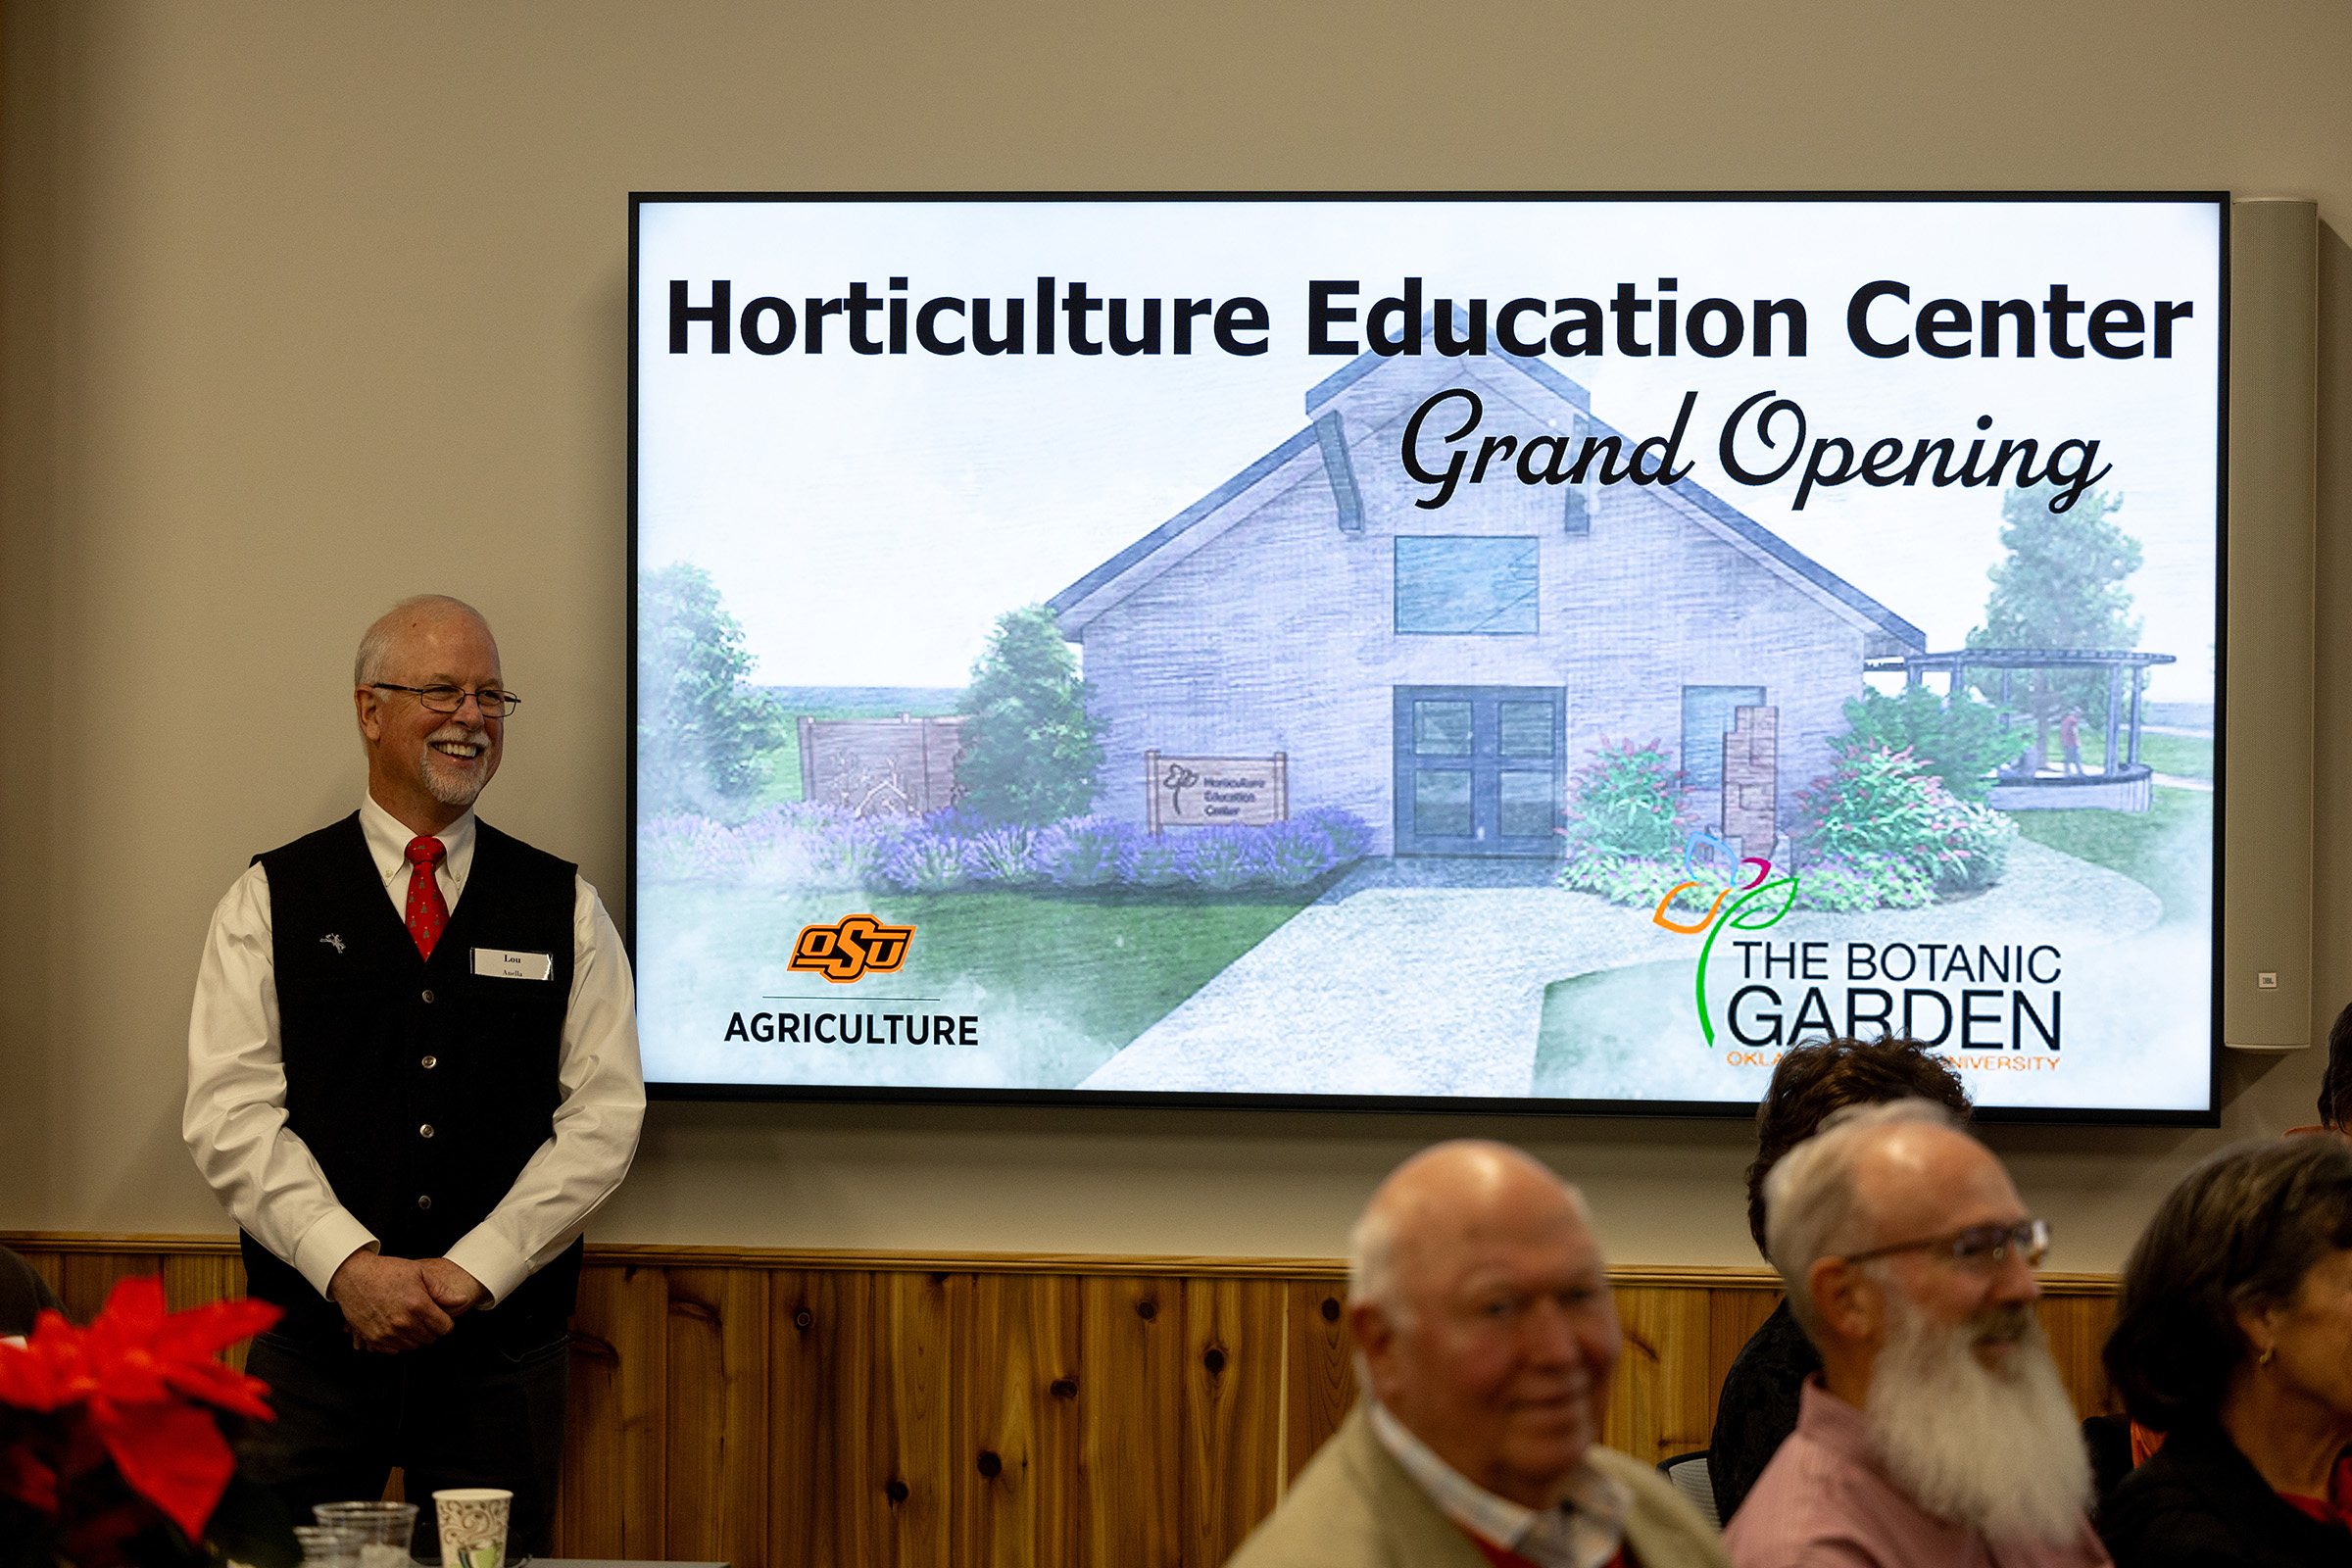 Lou Anella, director of The Botanic Garden at OSU, discusses community horticulture programming during the Horticulture Education Center grand opening presentation. (Photo by Mitchell Alcala, OSU Agriculture.)